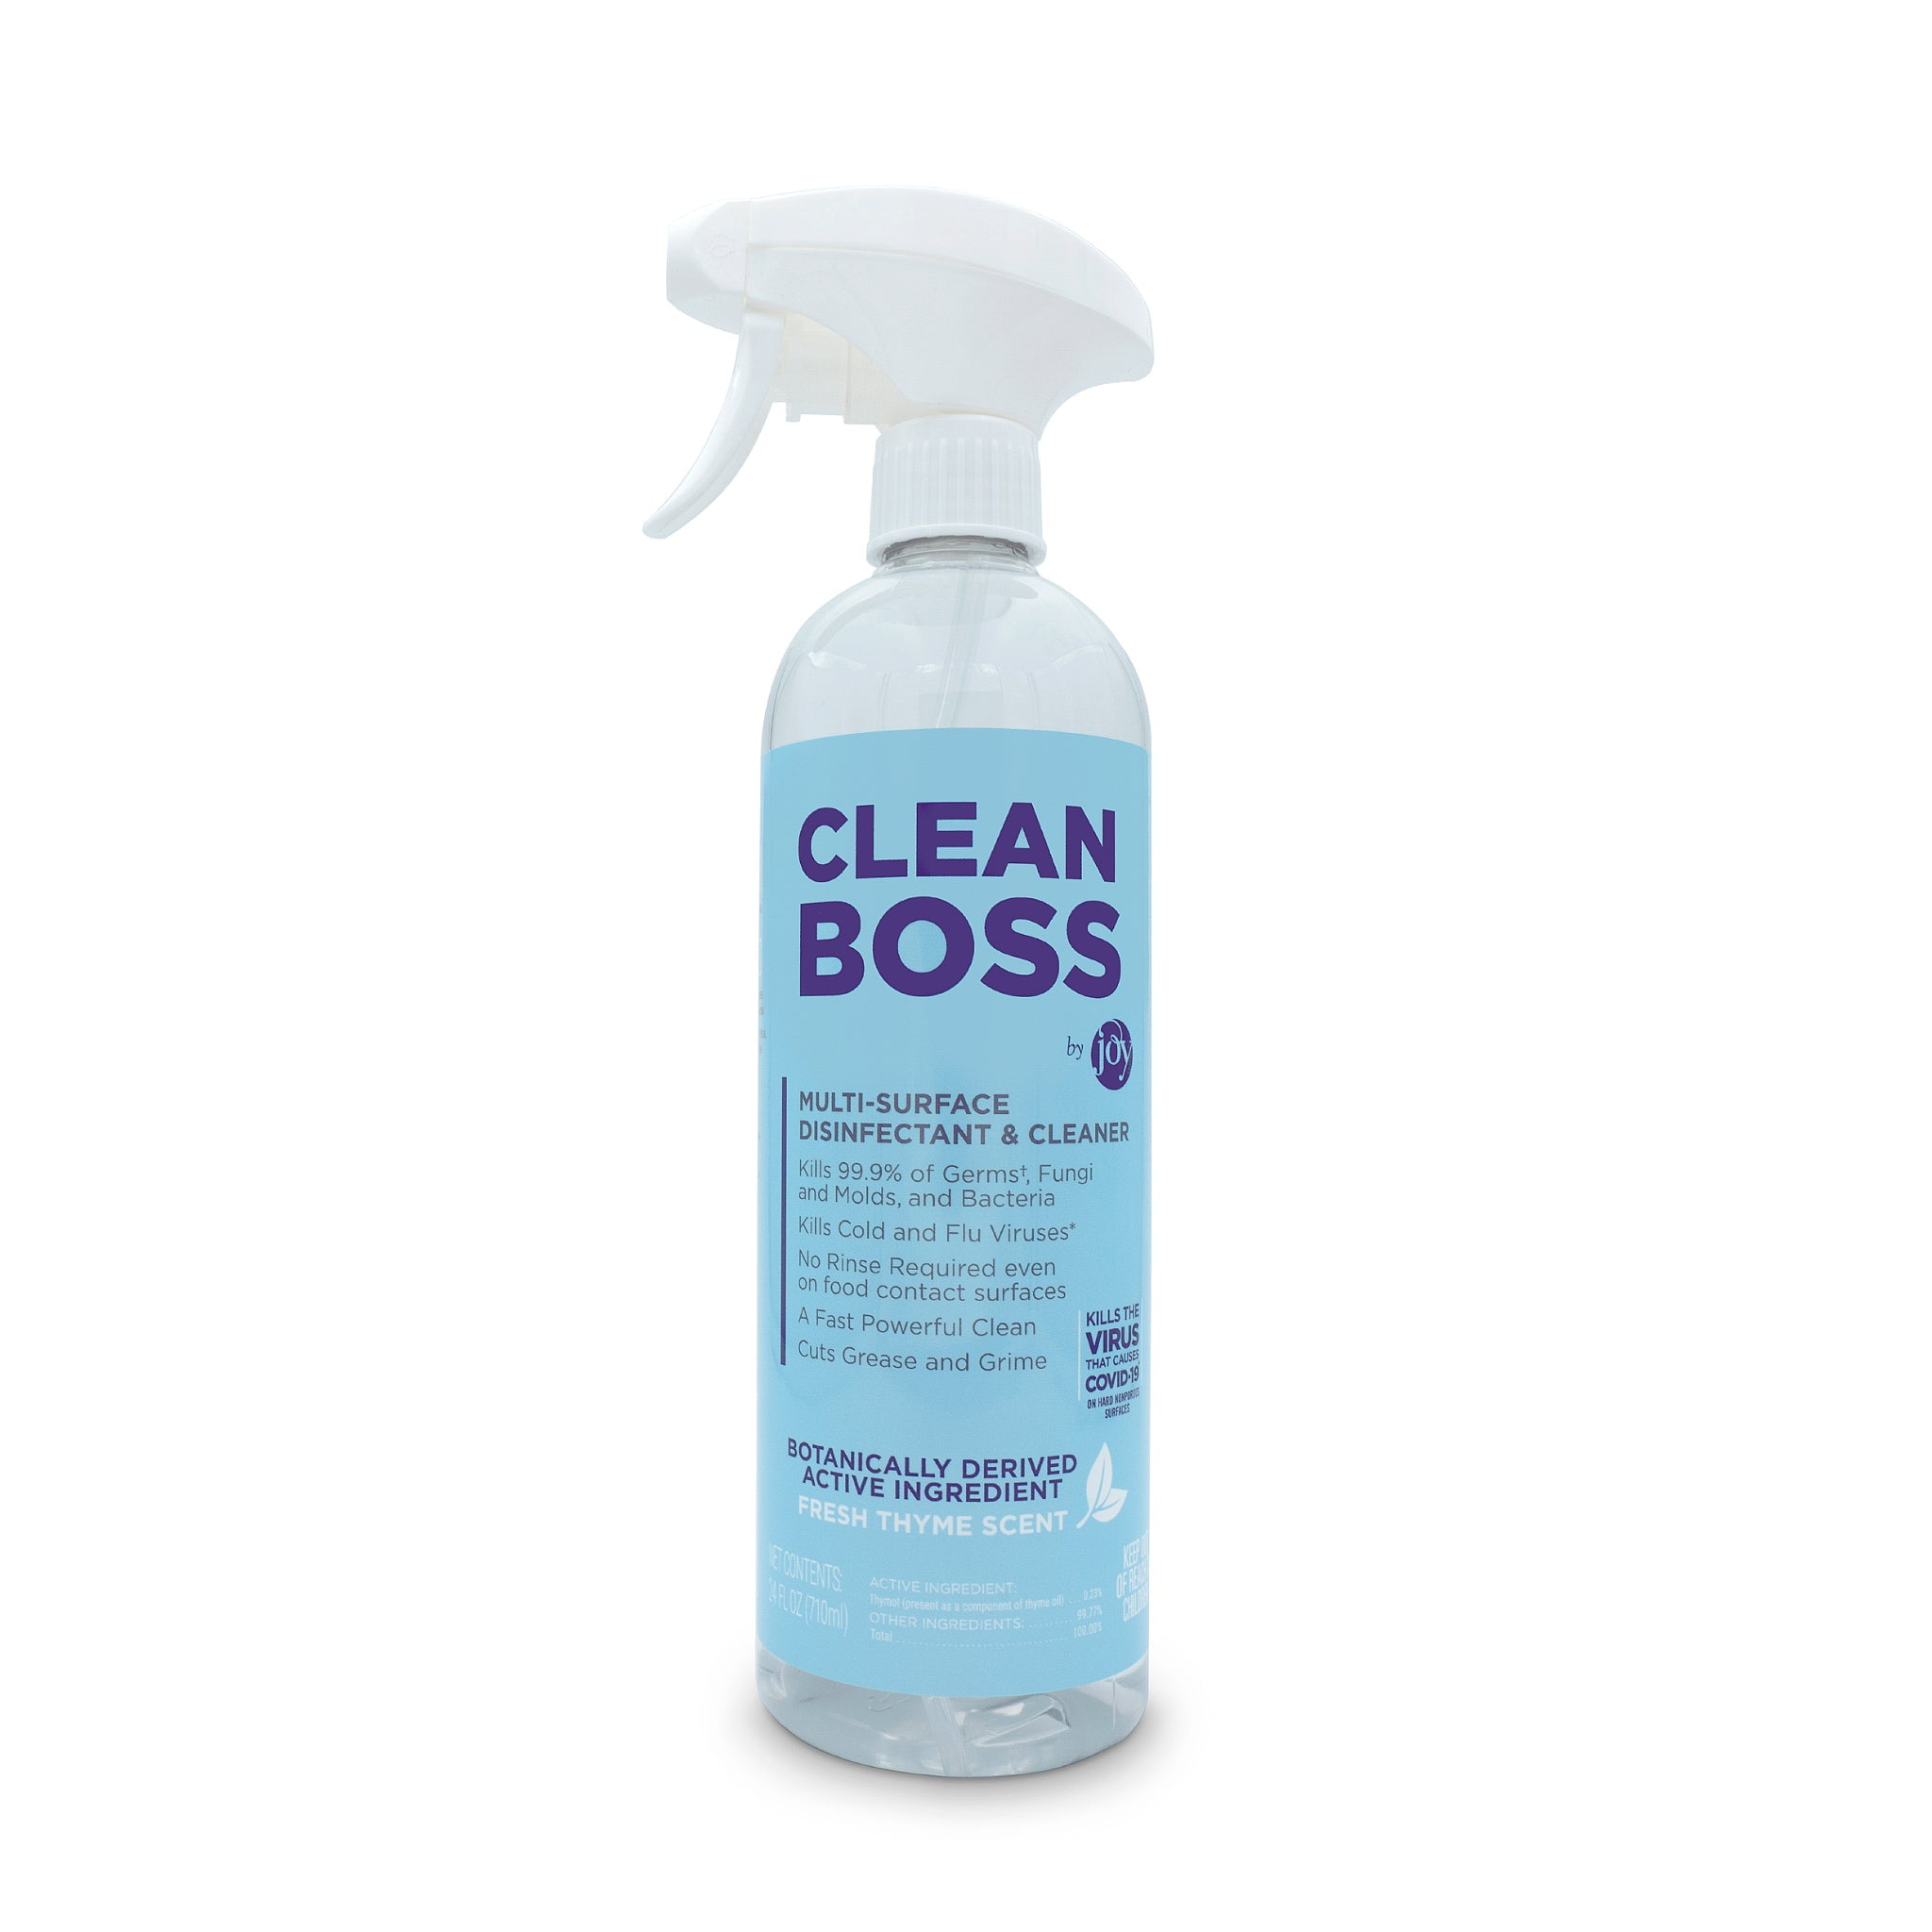 CleanBoss by Joy Multi-Surface Disinfectant & Cleaner - Walmart.com